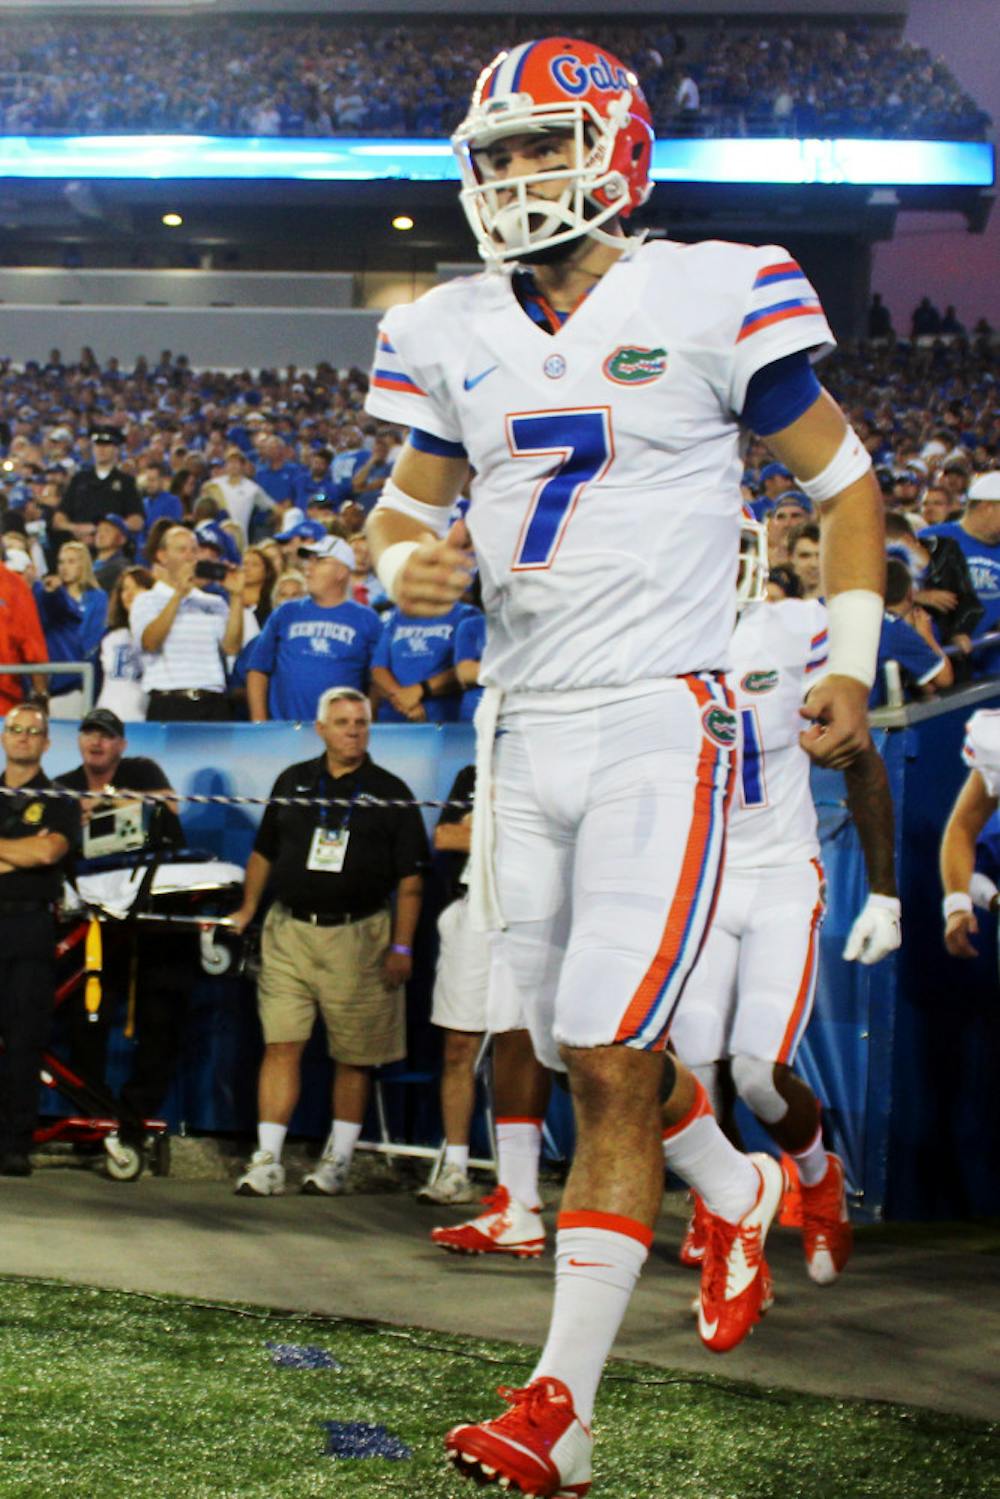 <p>UF quarterback Will Grier runs onto the field prior to Florida's 14-9 win against Kentucky on Sept. 19, 2015, at Commonwealth Stadium in Lexington, Kentucky.</p>